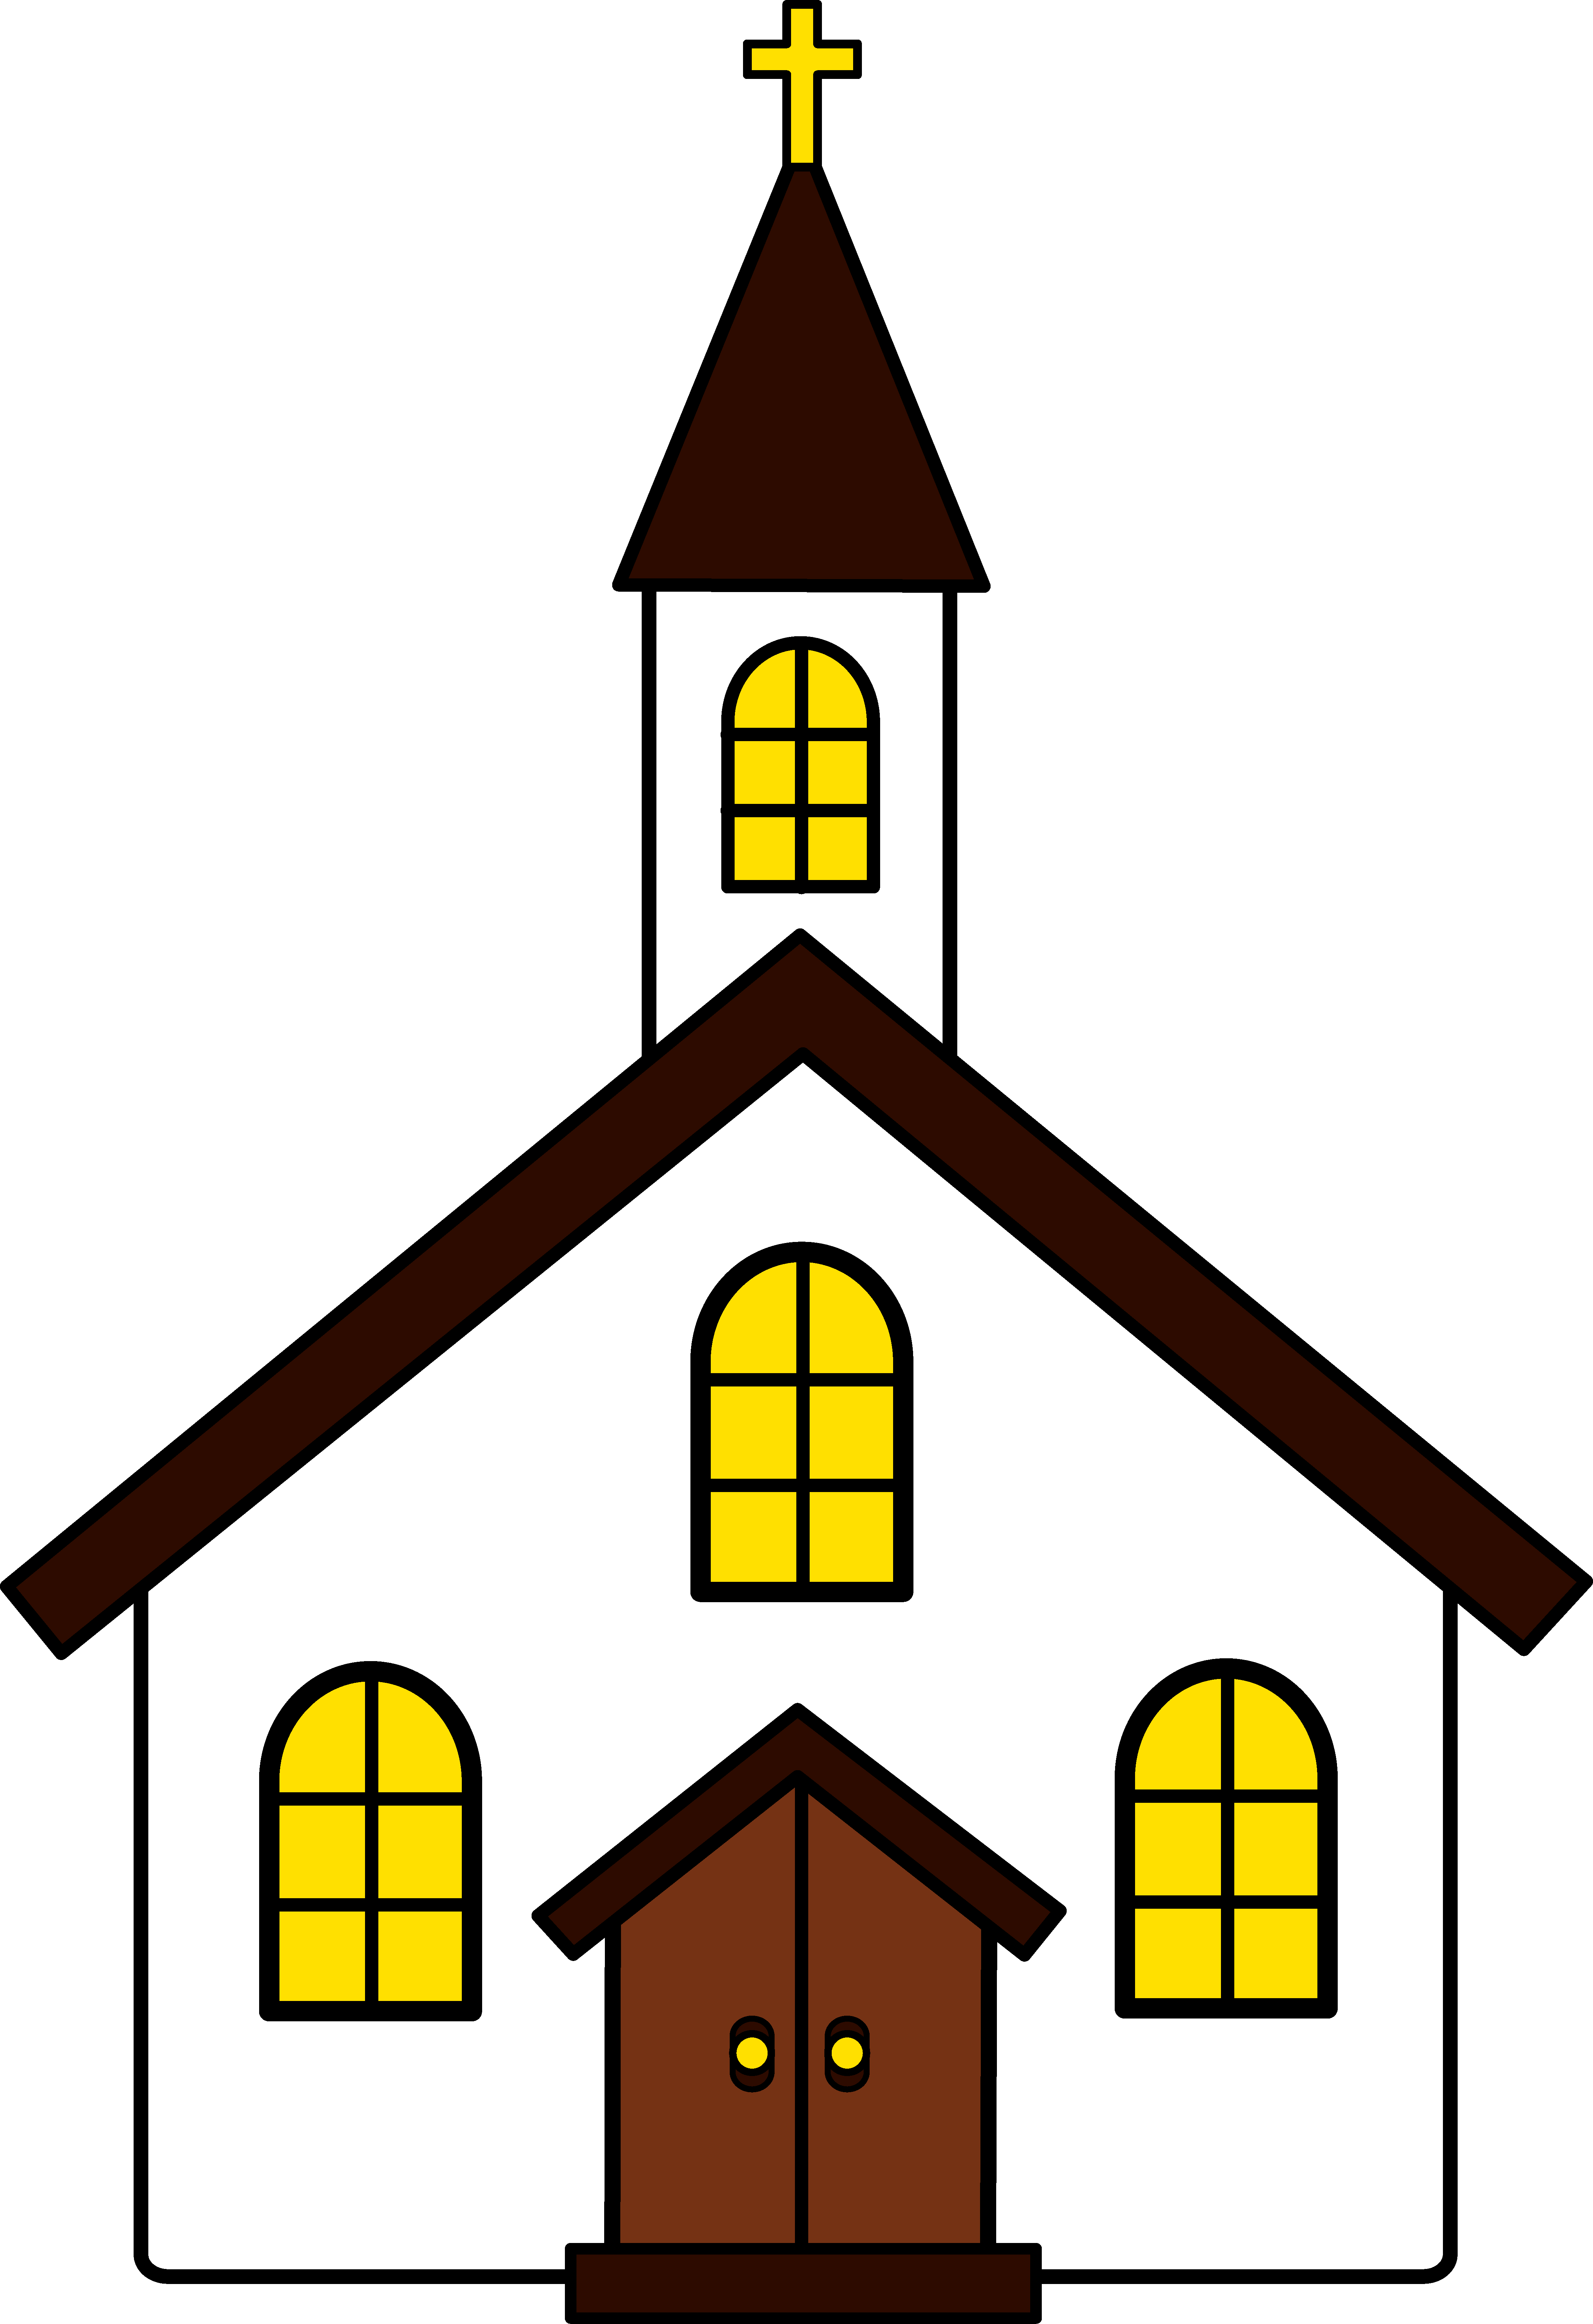 Family going to church clipart free clipart images - Clipartix